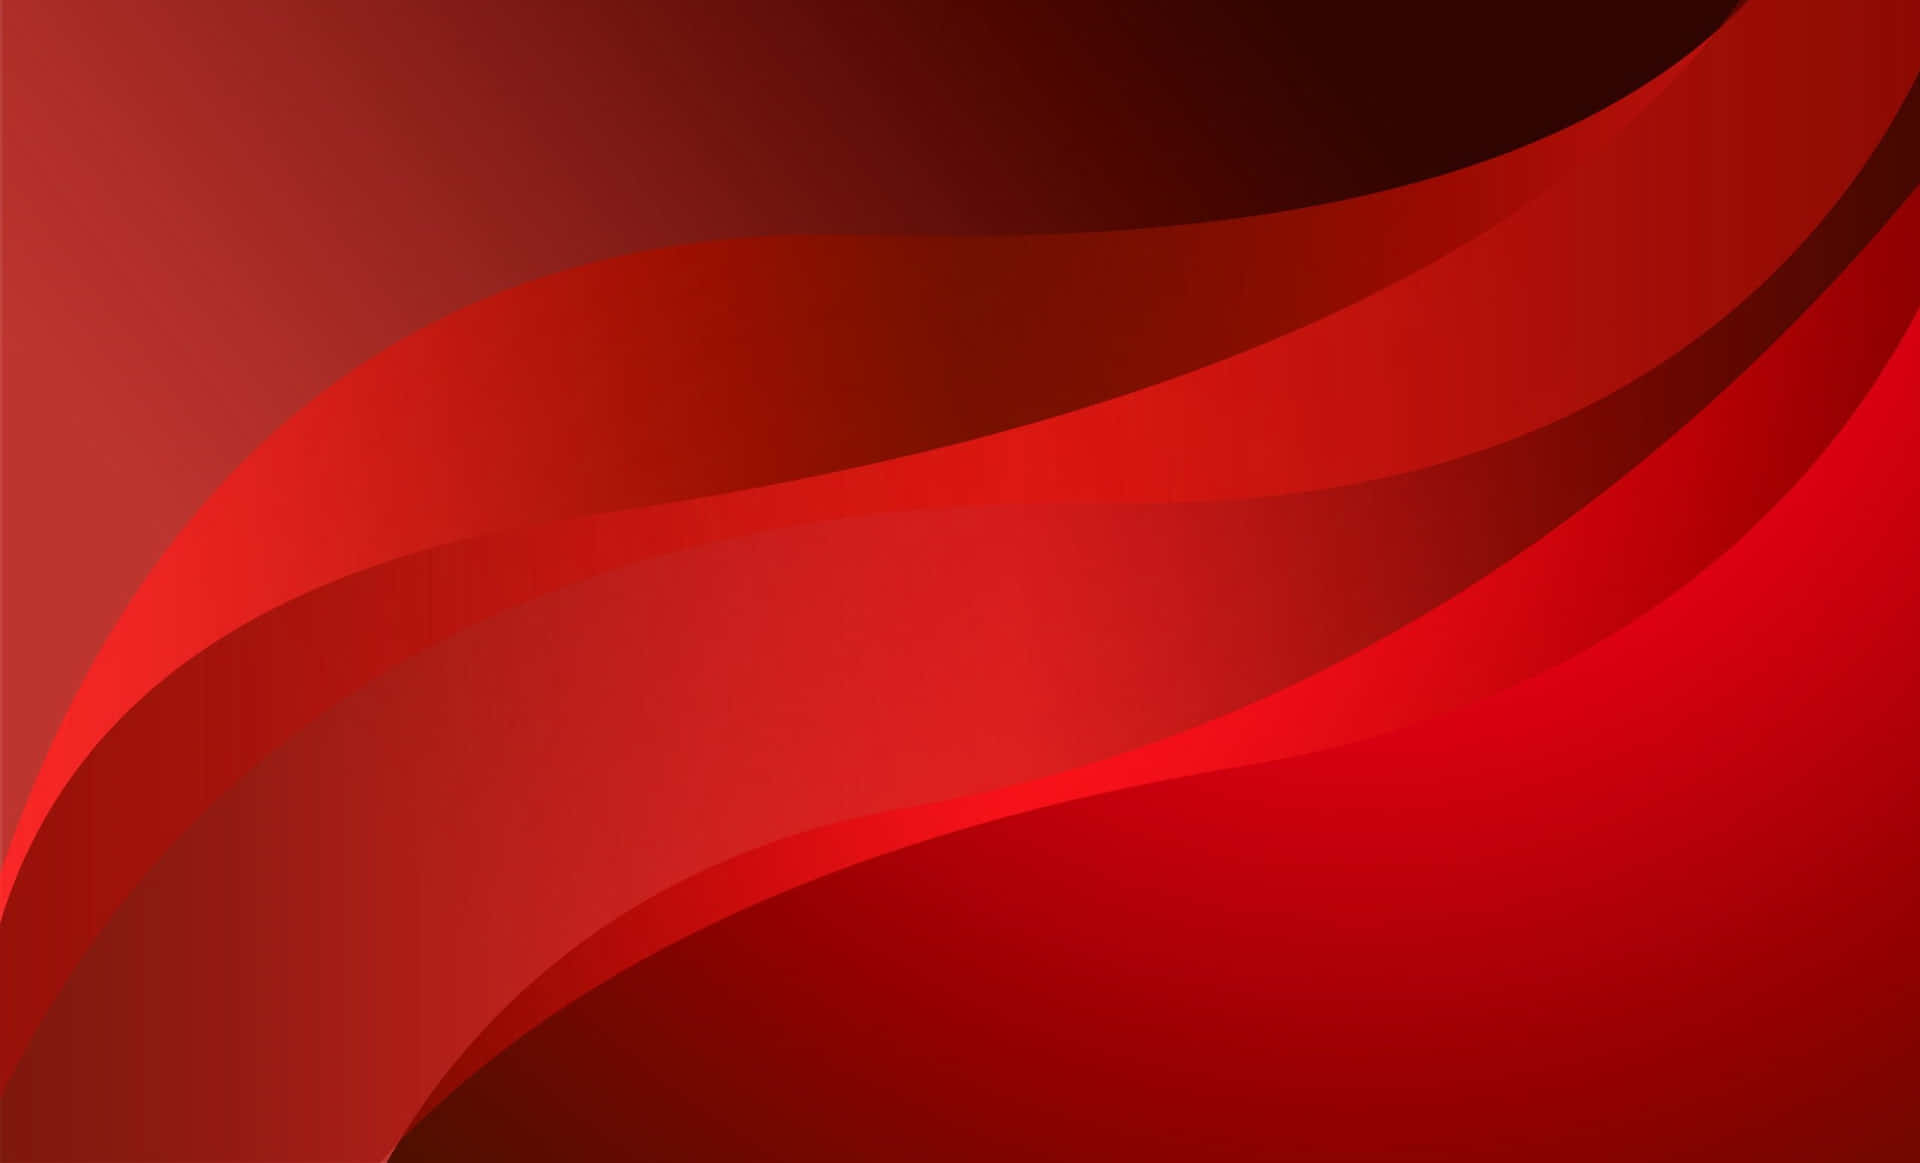 A bright red background fills the screen.